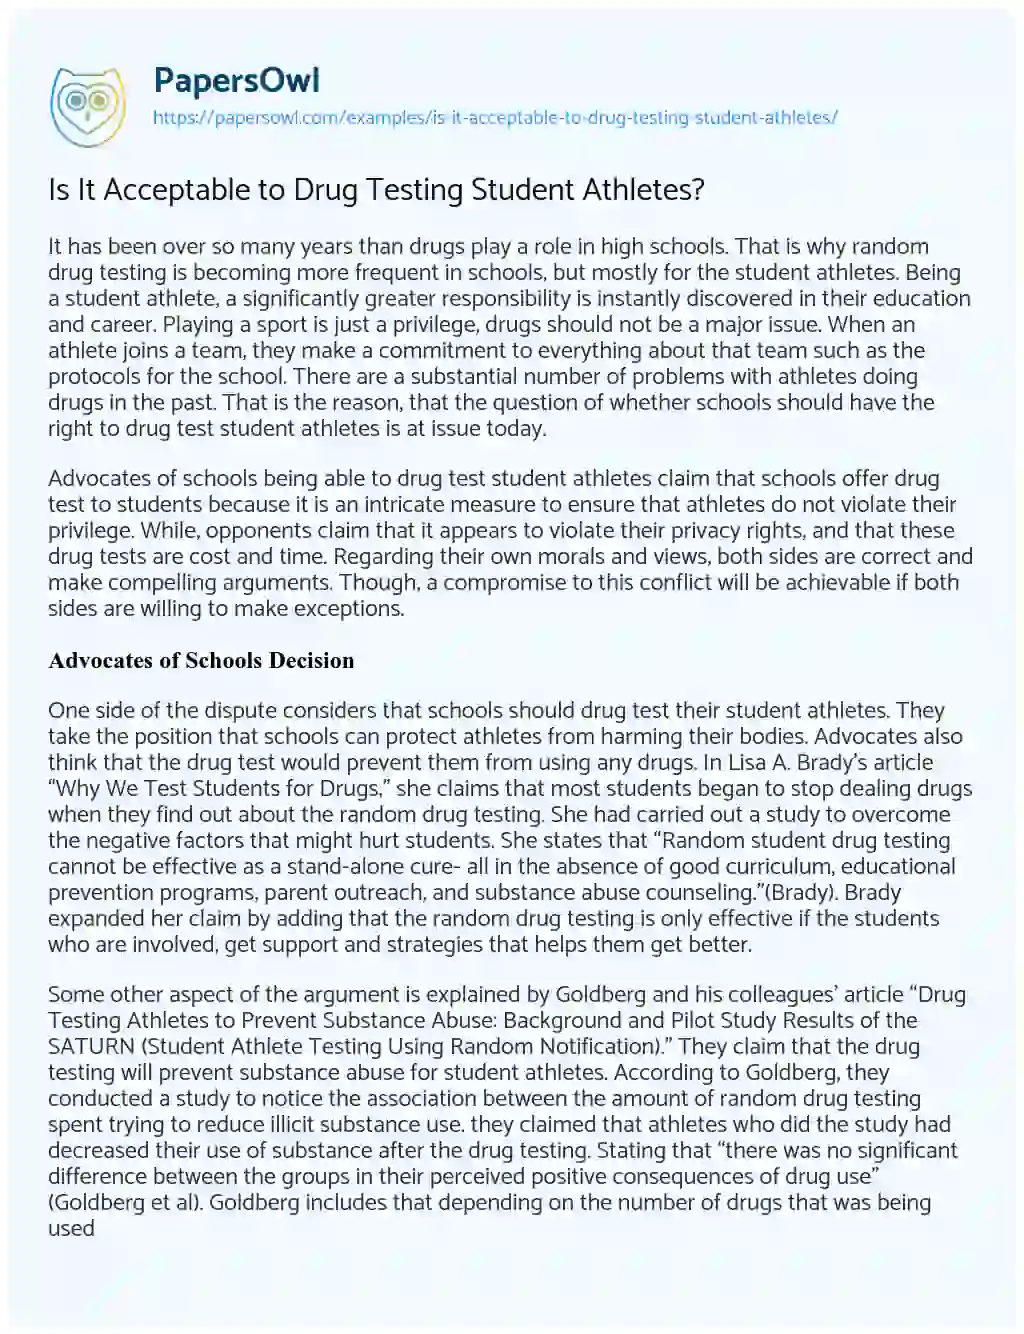 Essay on Is it Acceptable to Drug Testing Student Athletes?